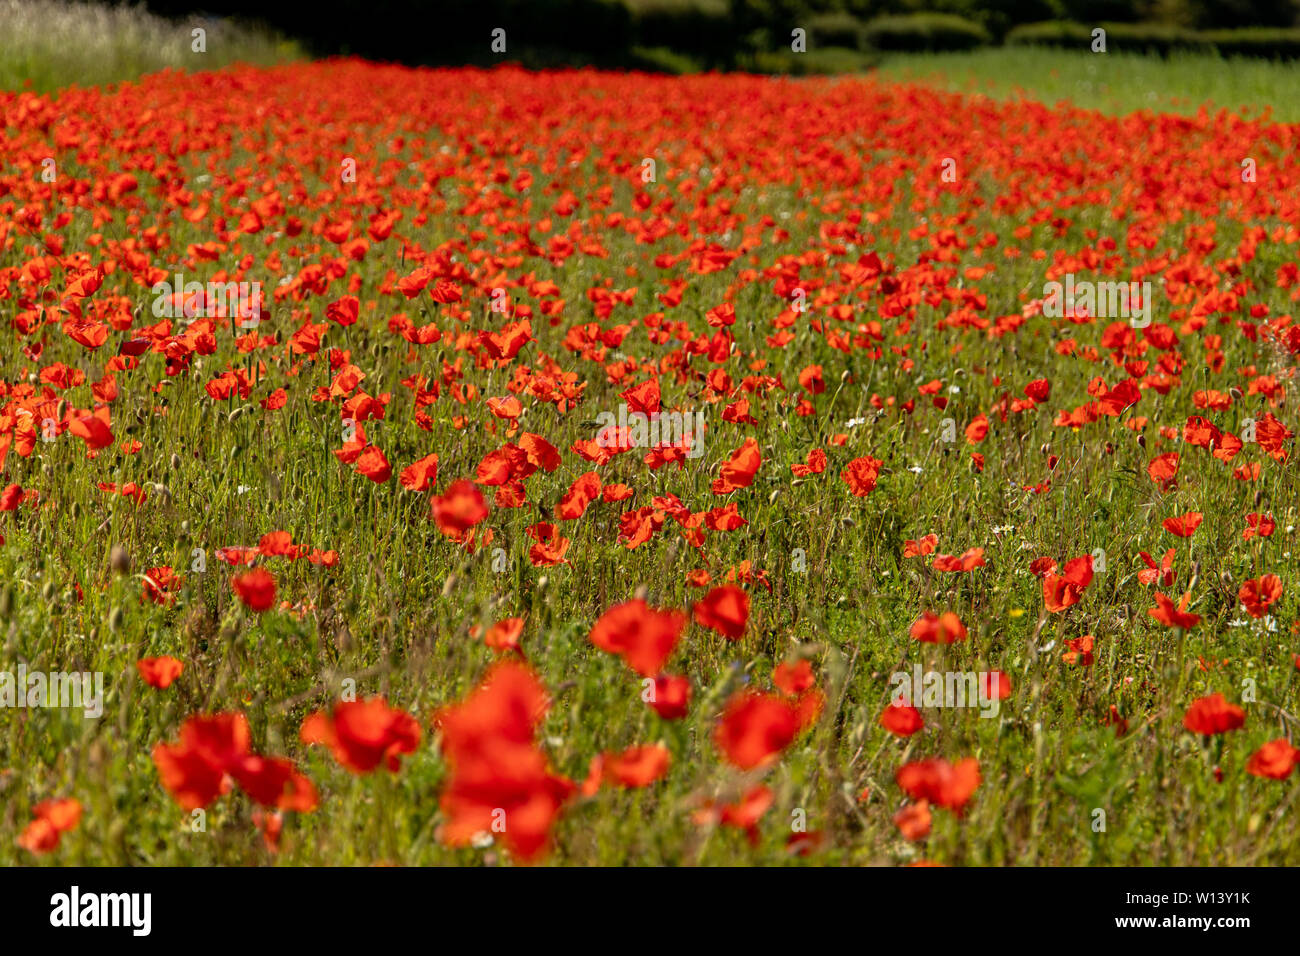 Lots of Poppies in a field. Stock Photo